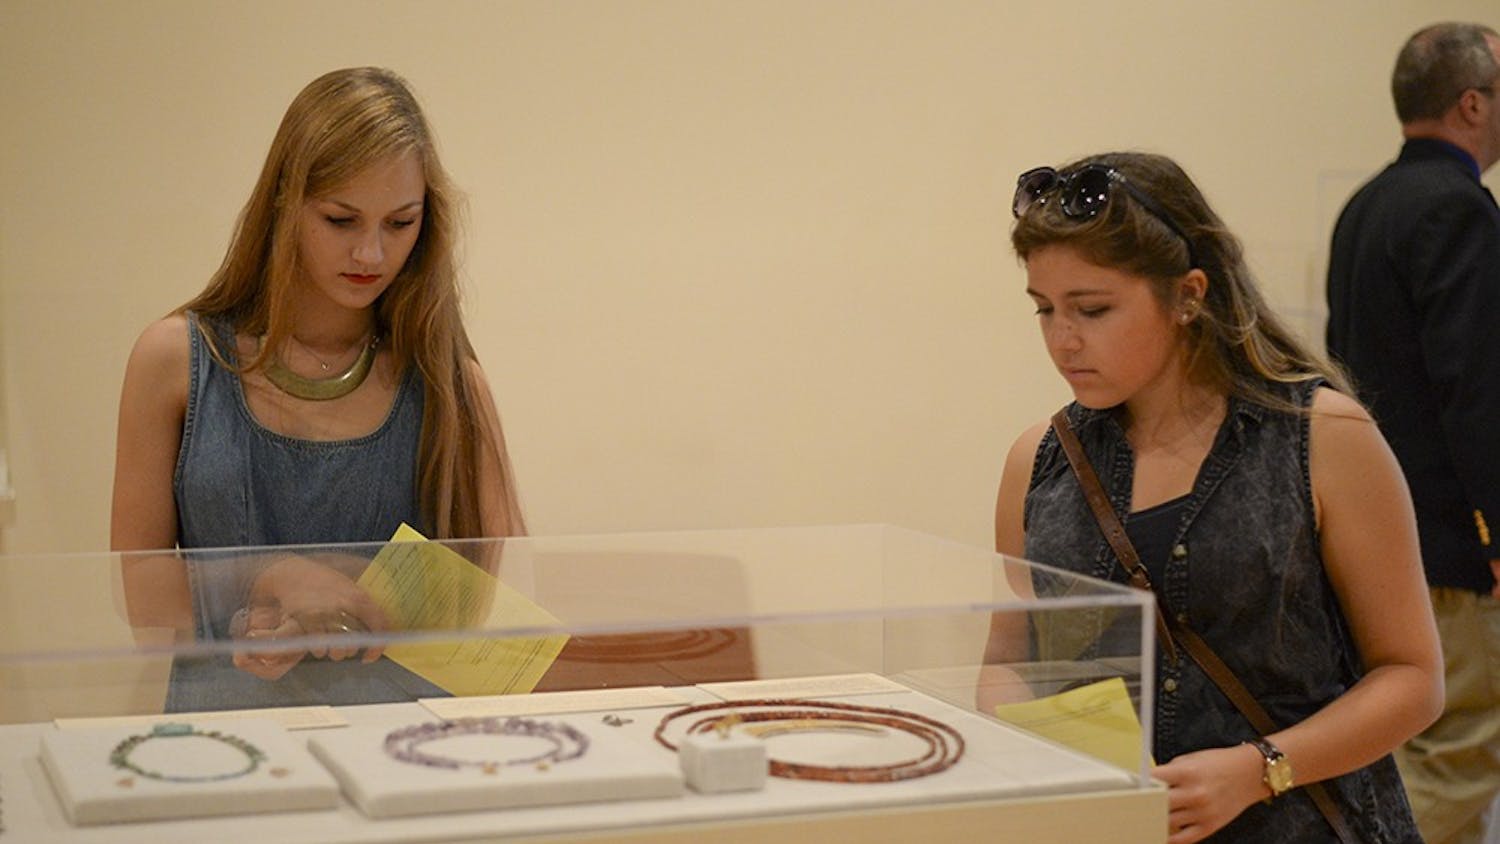 Freshman Emmaline Terry, left, and sophomore Alex Miller, right, look at a display on the second floor of the IU Art Museum during the MIX at the Museum event on Friday.